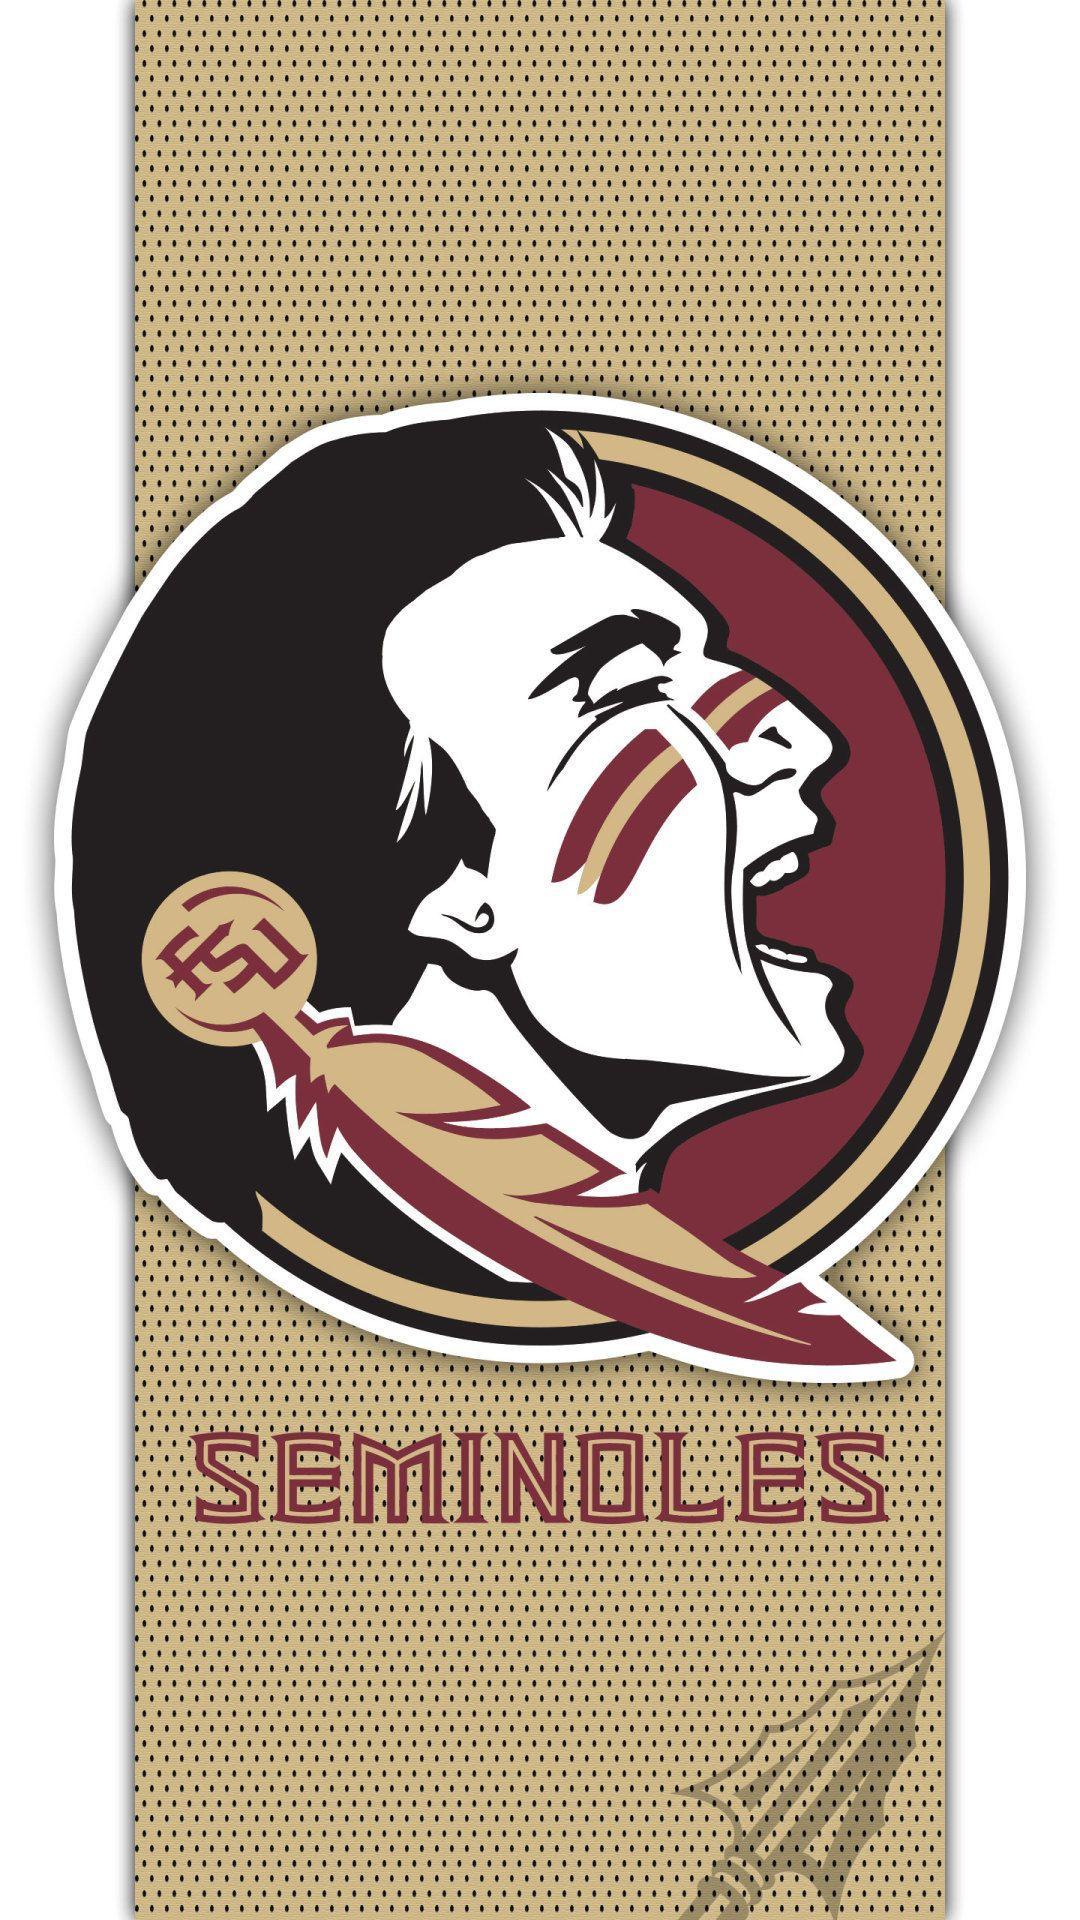 Florida State Seminoles A cell phone wallpaper